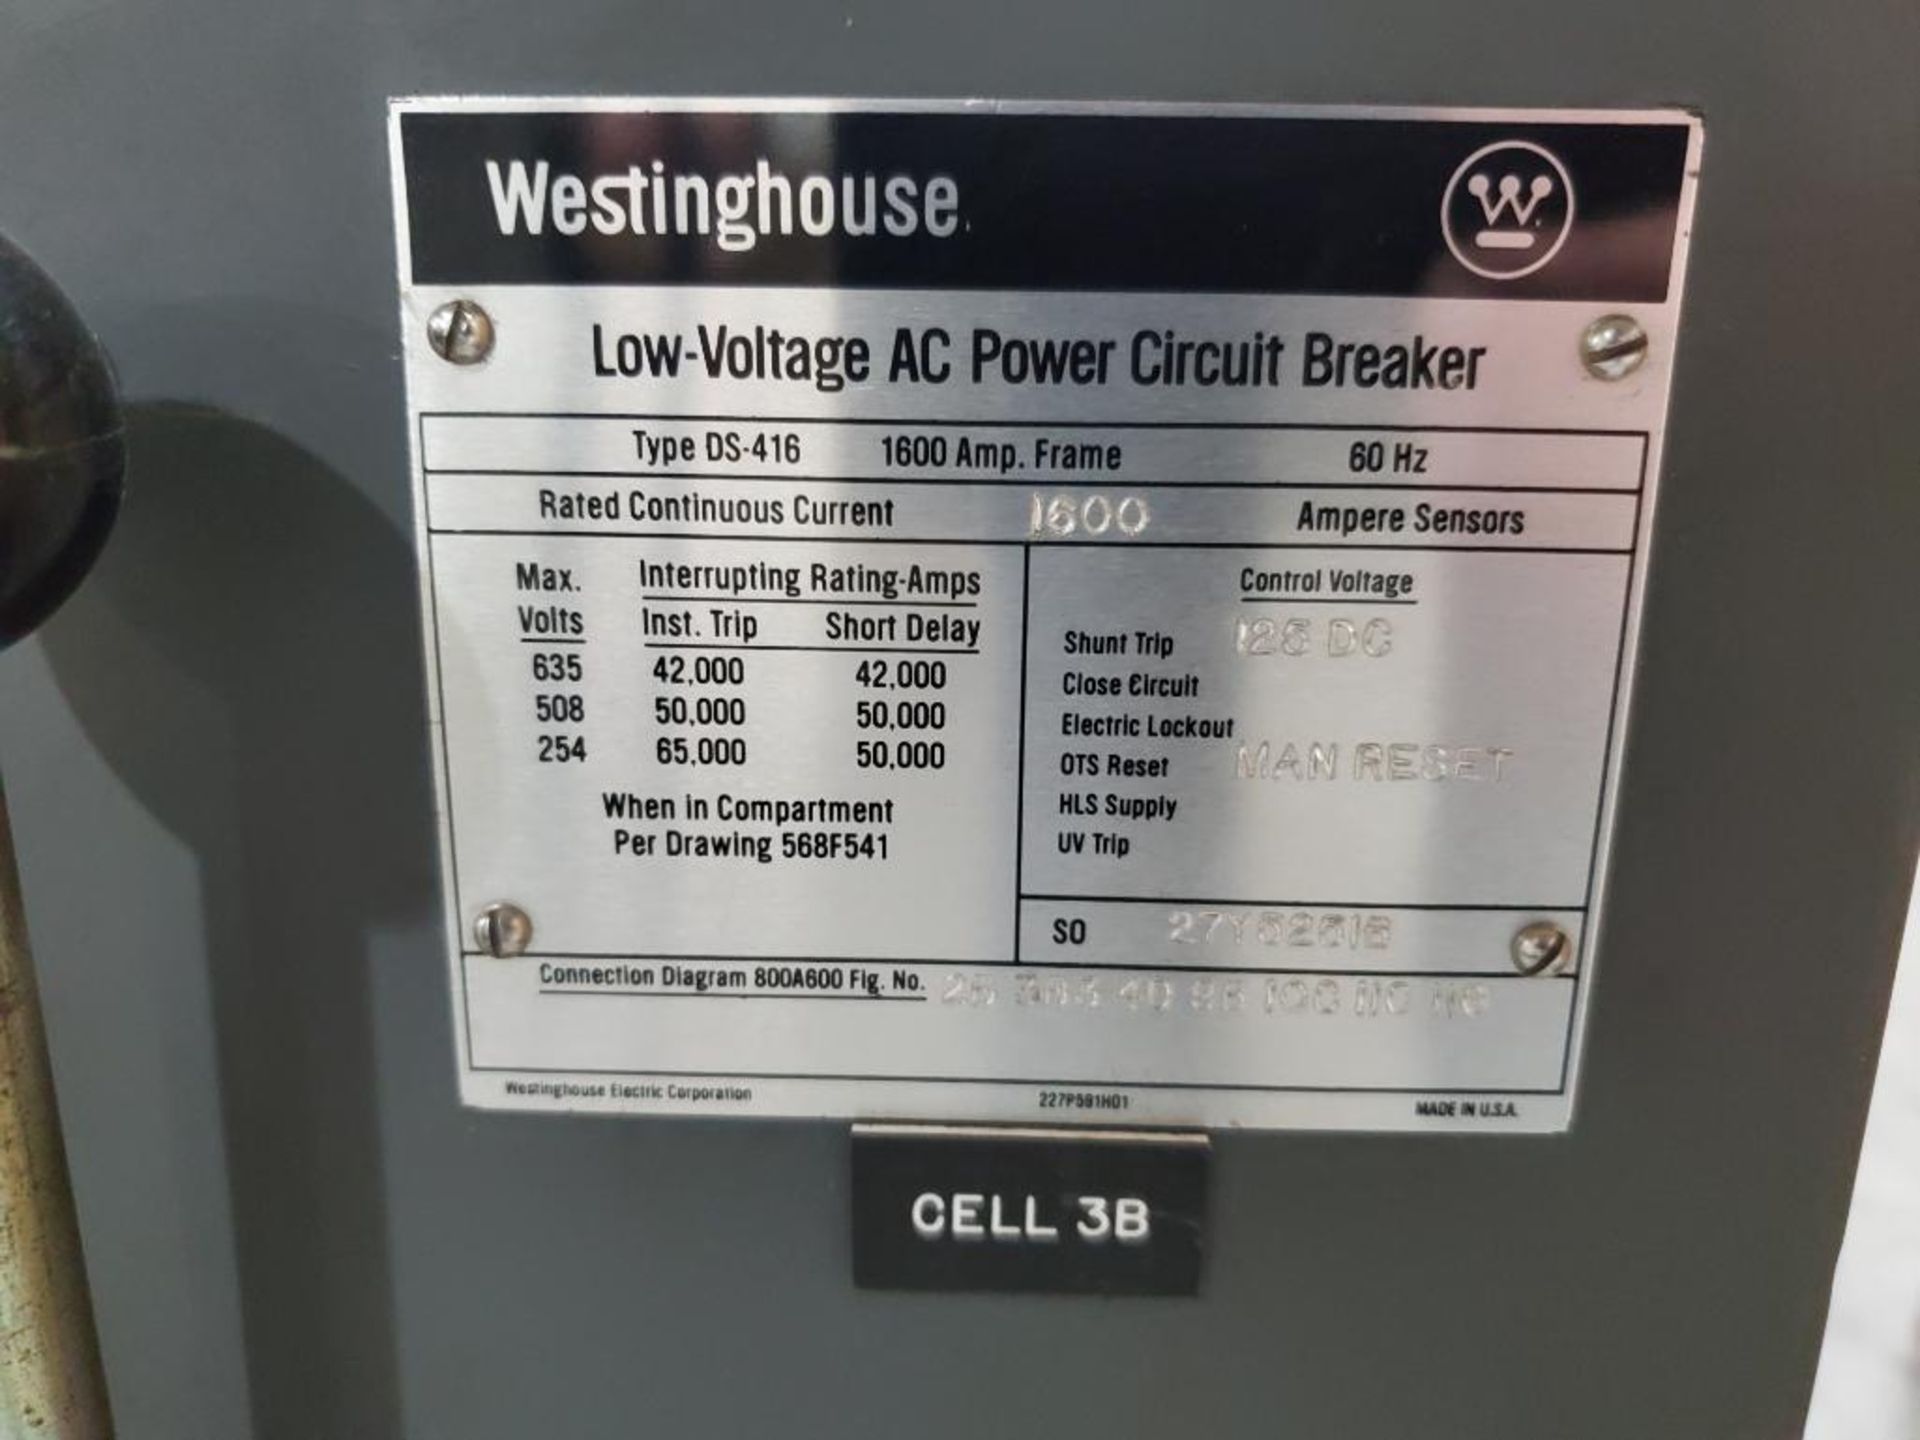 1600 amp Westinghouse Low Voltage AC Power Circuit Breaker. Type DS-416. - Image 3 of 9